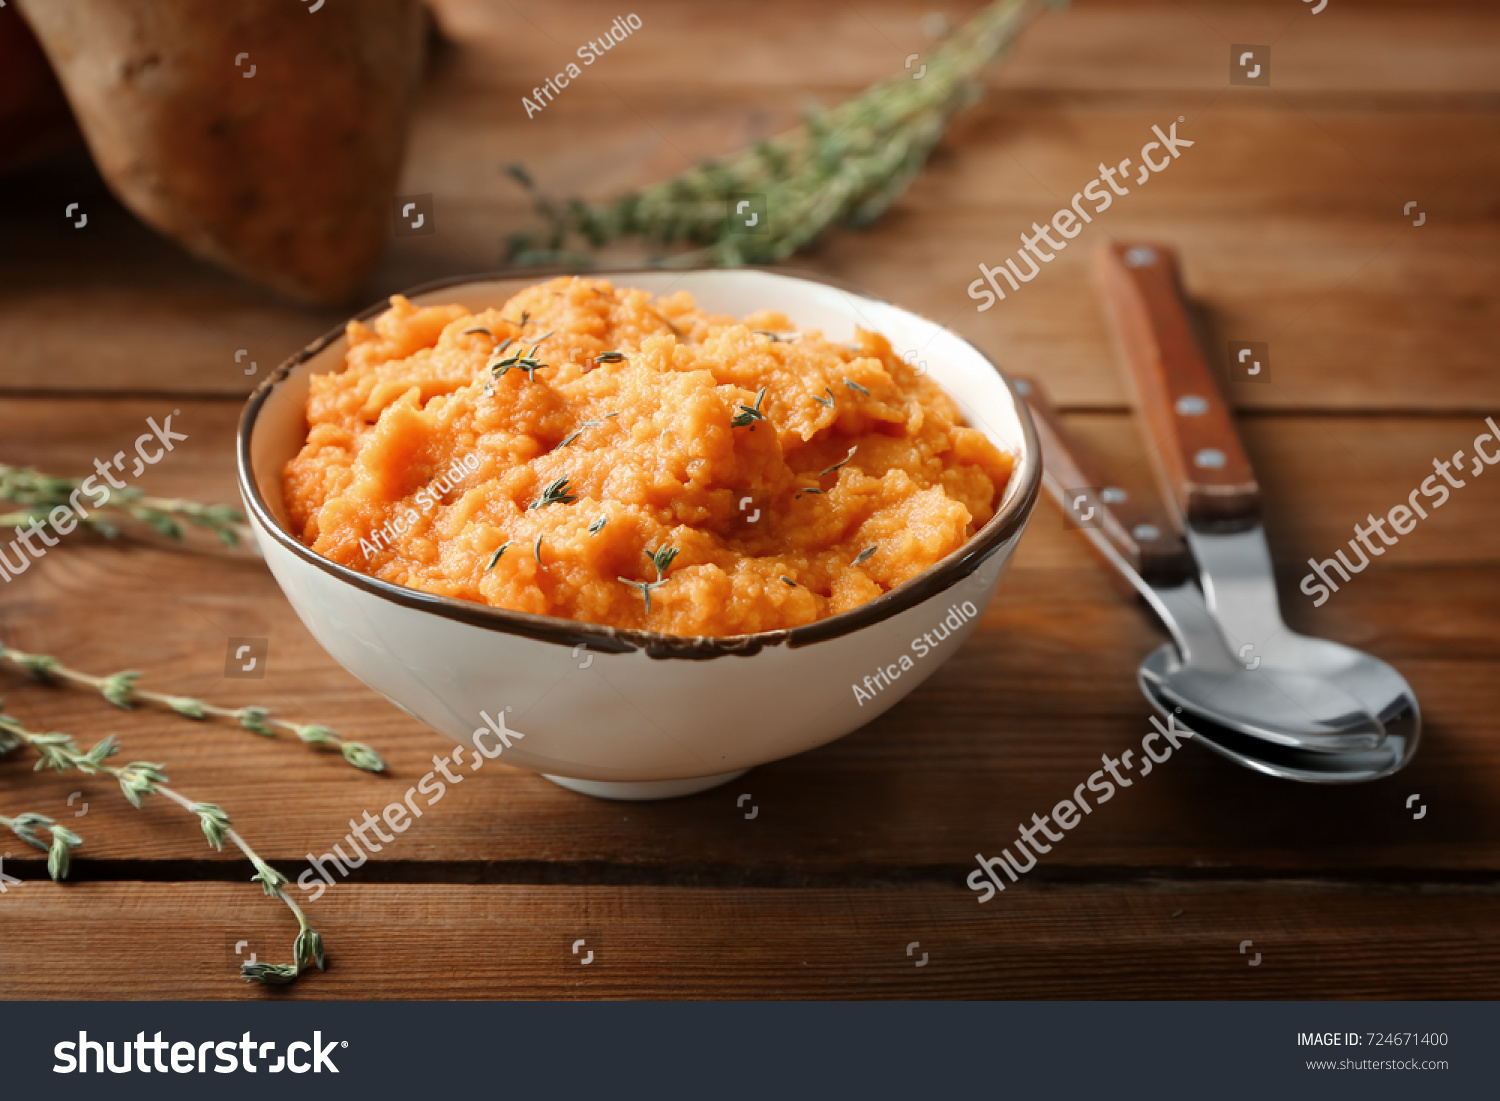 Bowl with mashed sweet potato on wooden background #724671400